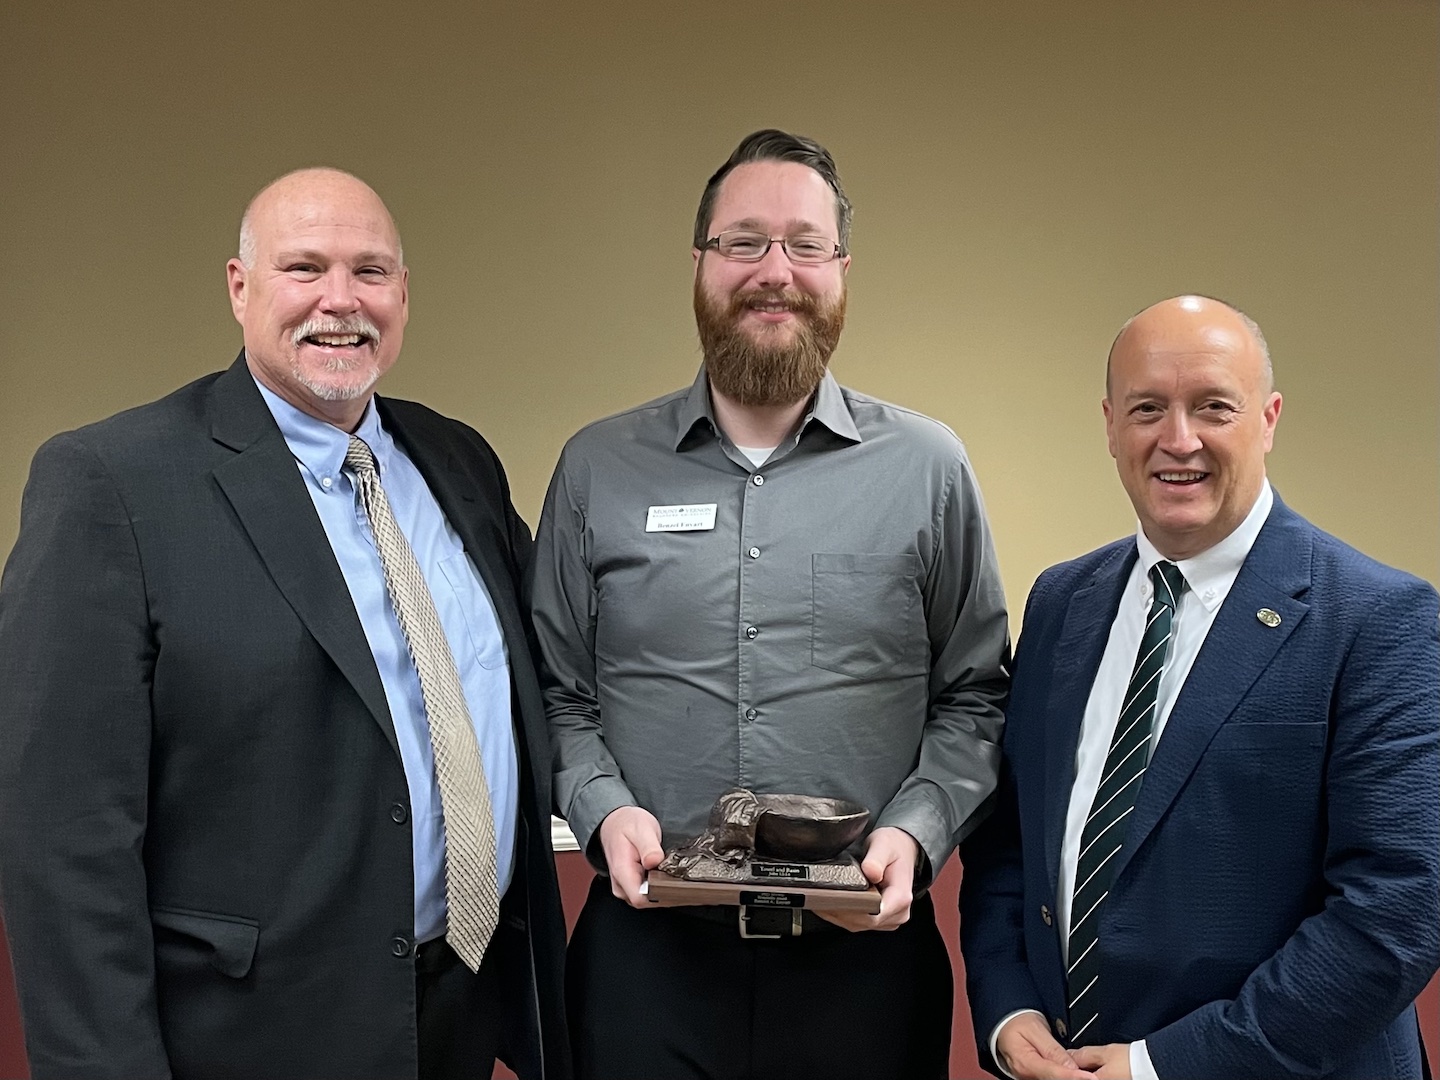 Benzel A. Enyart, center, was presented the 2023 MVNU Board of Trustees Hospitality Award in recognition for his gracious and hospitable service to faculty, staff, students, and the public. He is pictured with Rev. Ed Phillips, Board Chair, left; and MVNU President Dr. Carson Castleman, right.